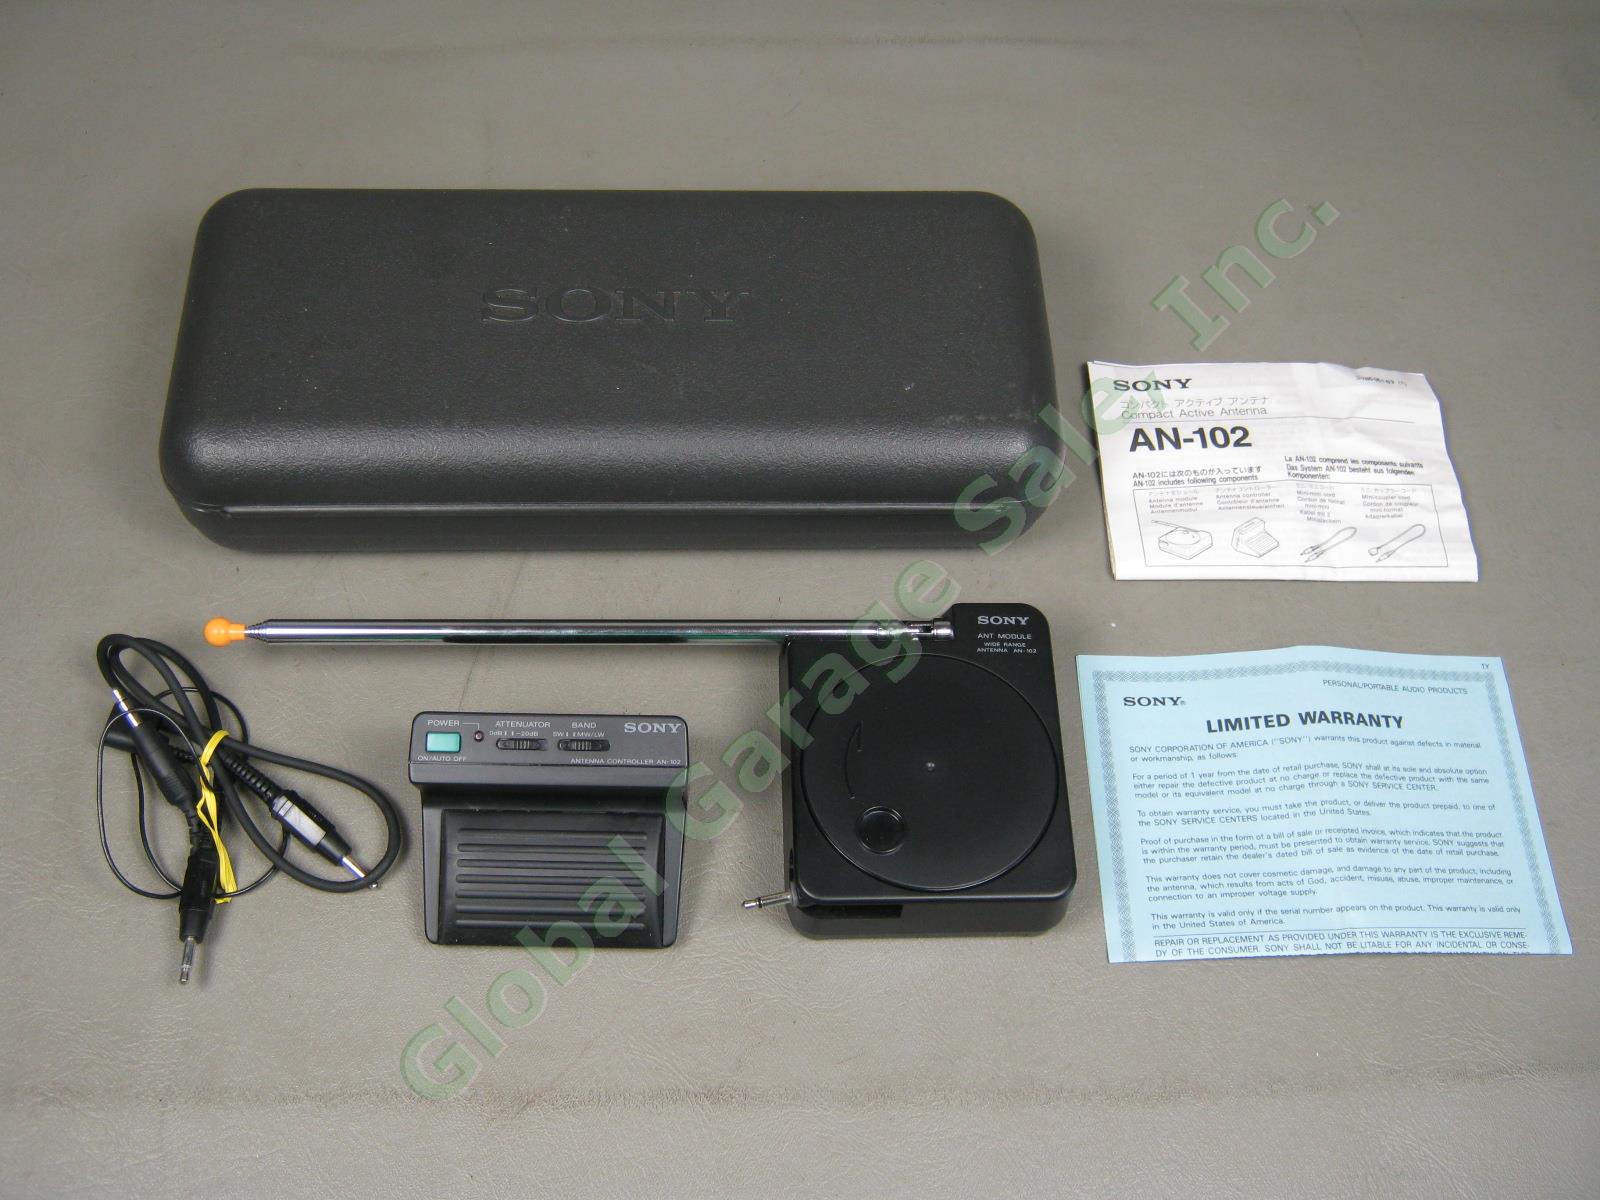 Sony AN-102 Compact Active Wide Range Radio Antenna w/ Controller + Cable + Case